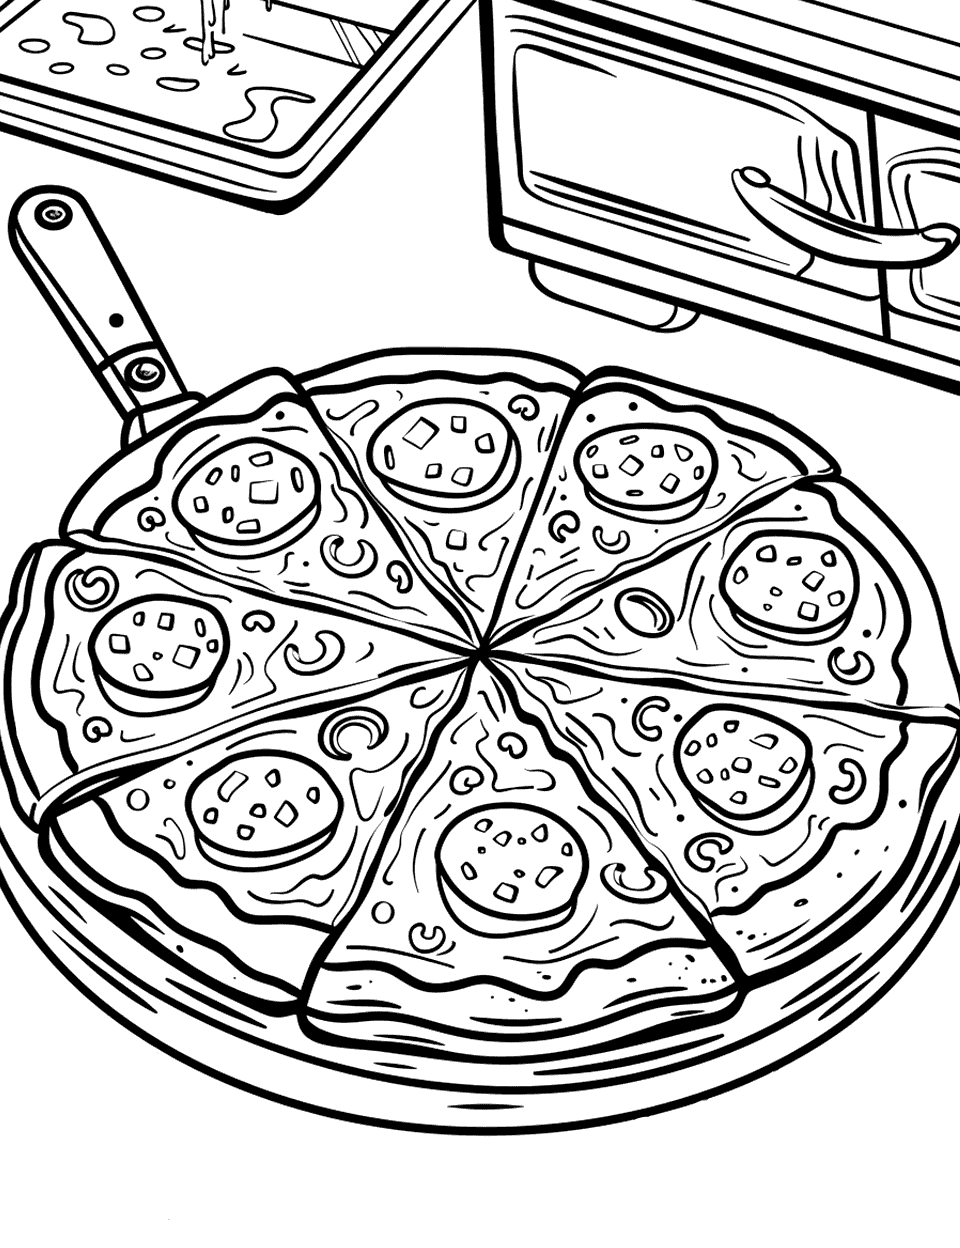 Pepperoni Pizza Coloring Page - A Pepperoni pizza on a kitchen table ready to be served.